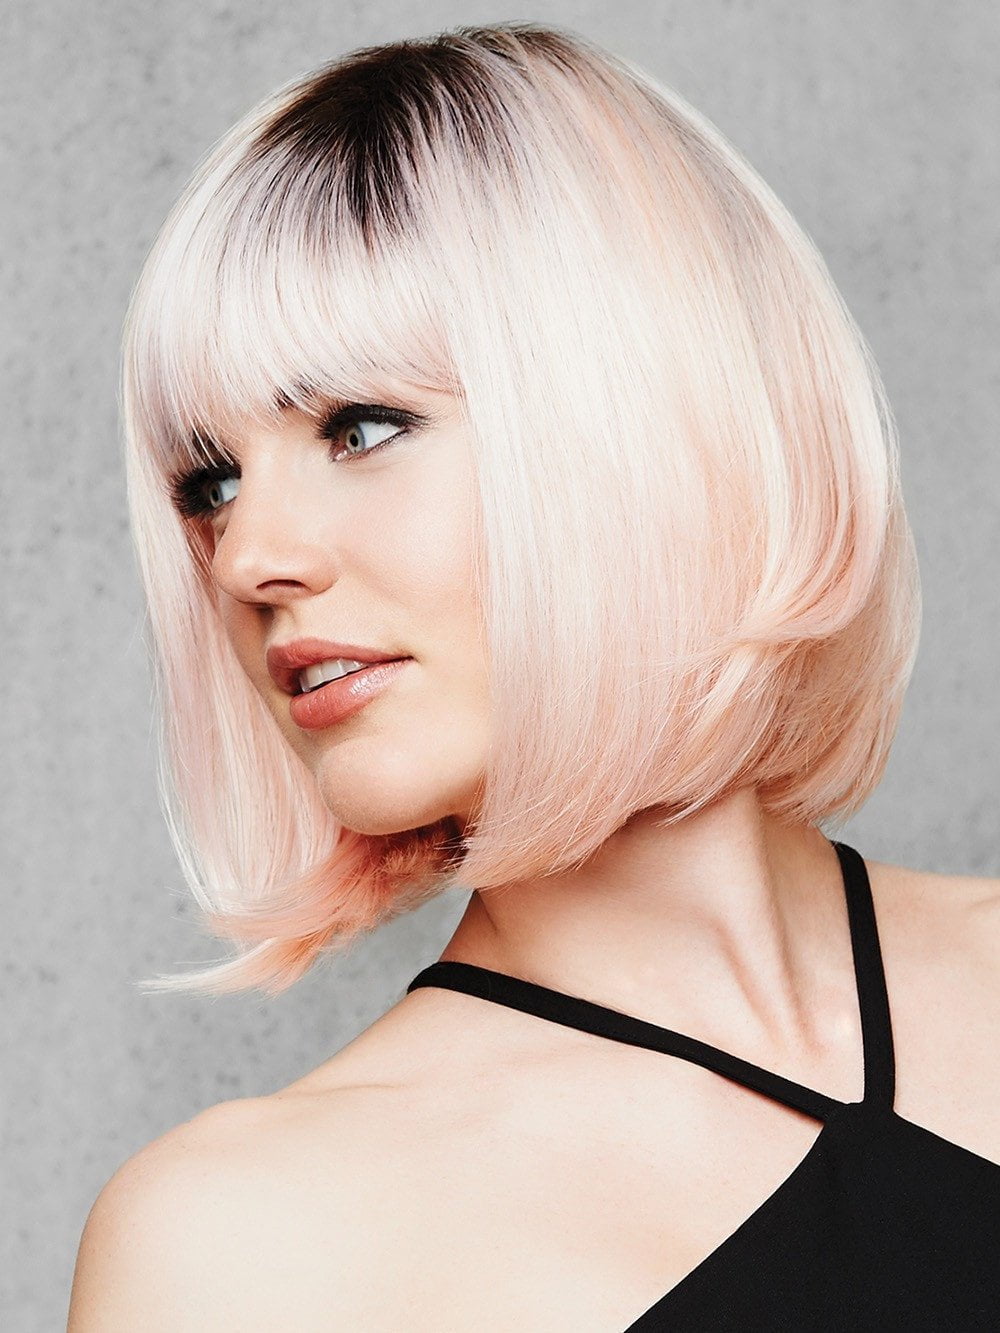 This pastel color trend is paired with a bob cut, making it classic yet edgy